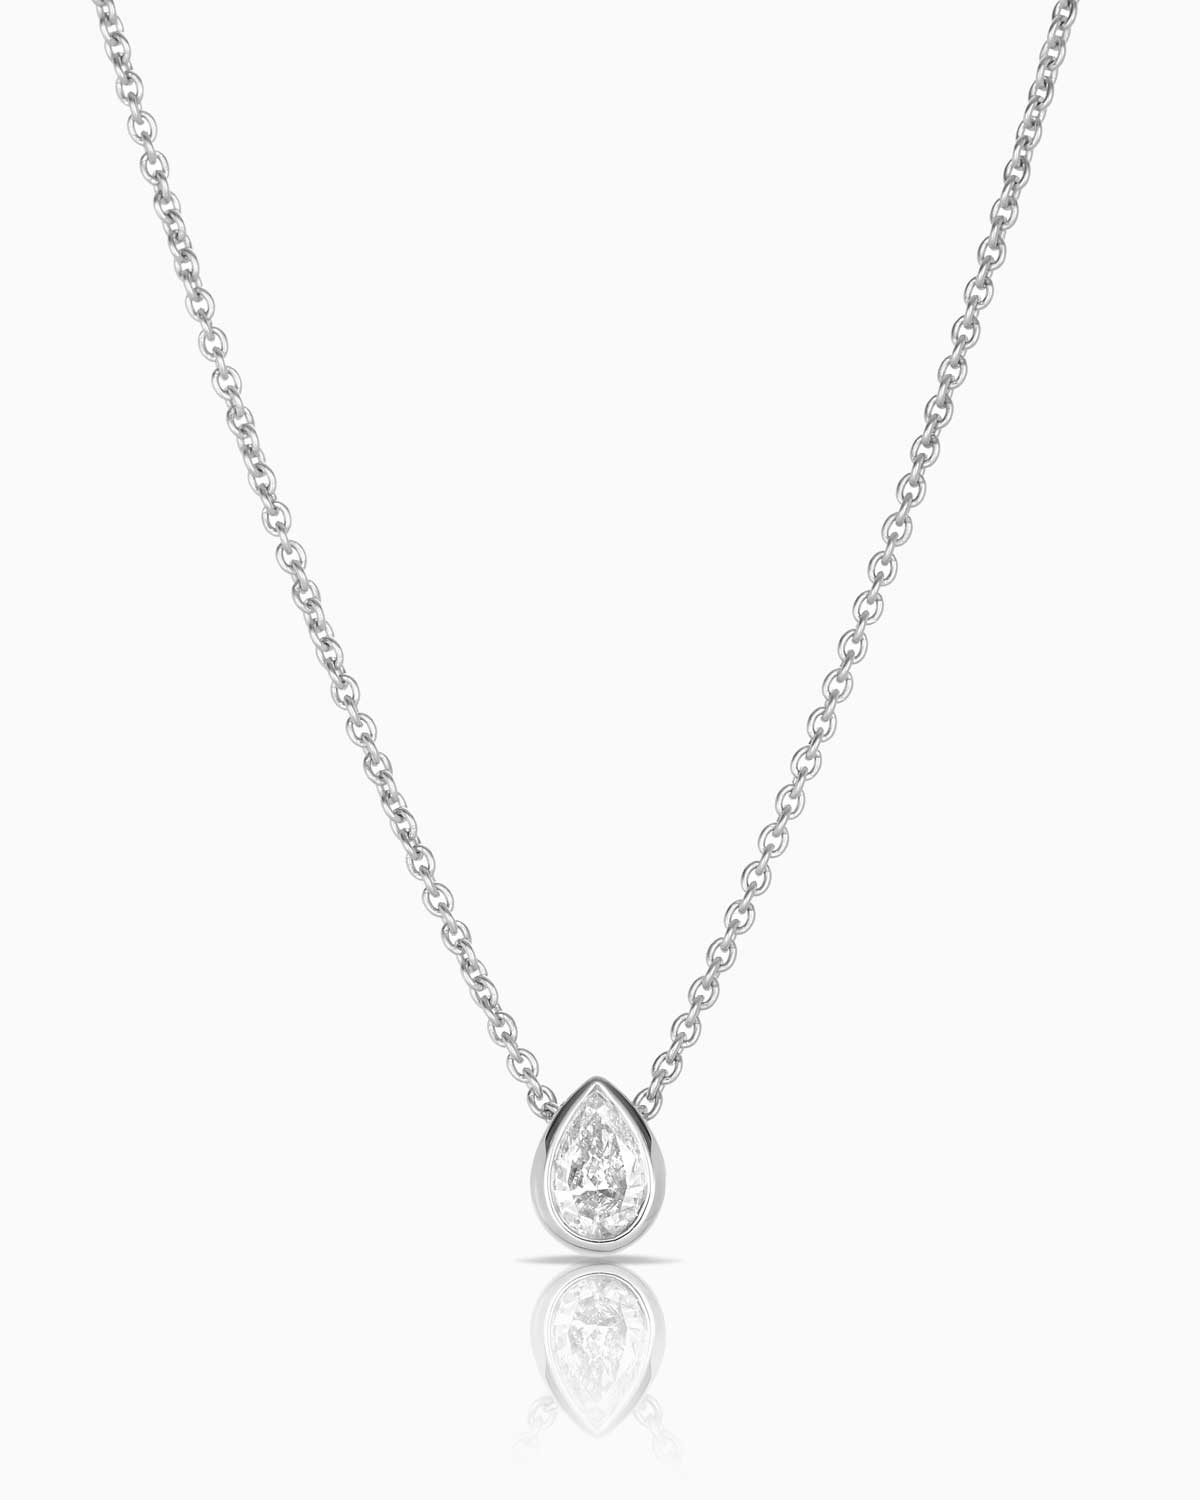 pear diamond necklace featuring a 0.27ct pear cut diamond bezel set in 9 karat white gold along a delicate cable link chain.